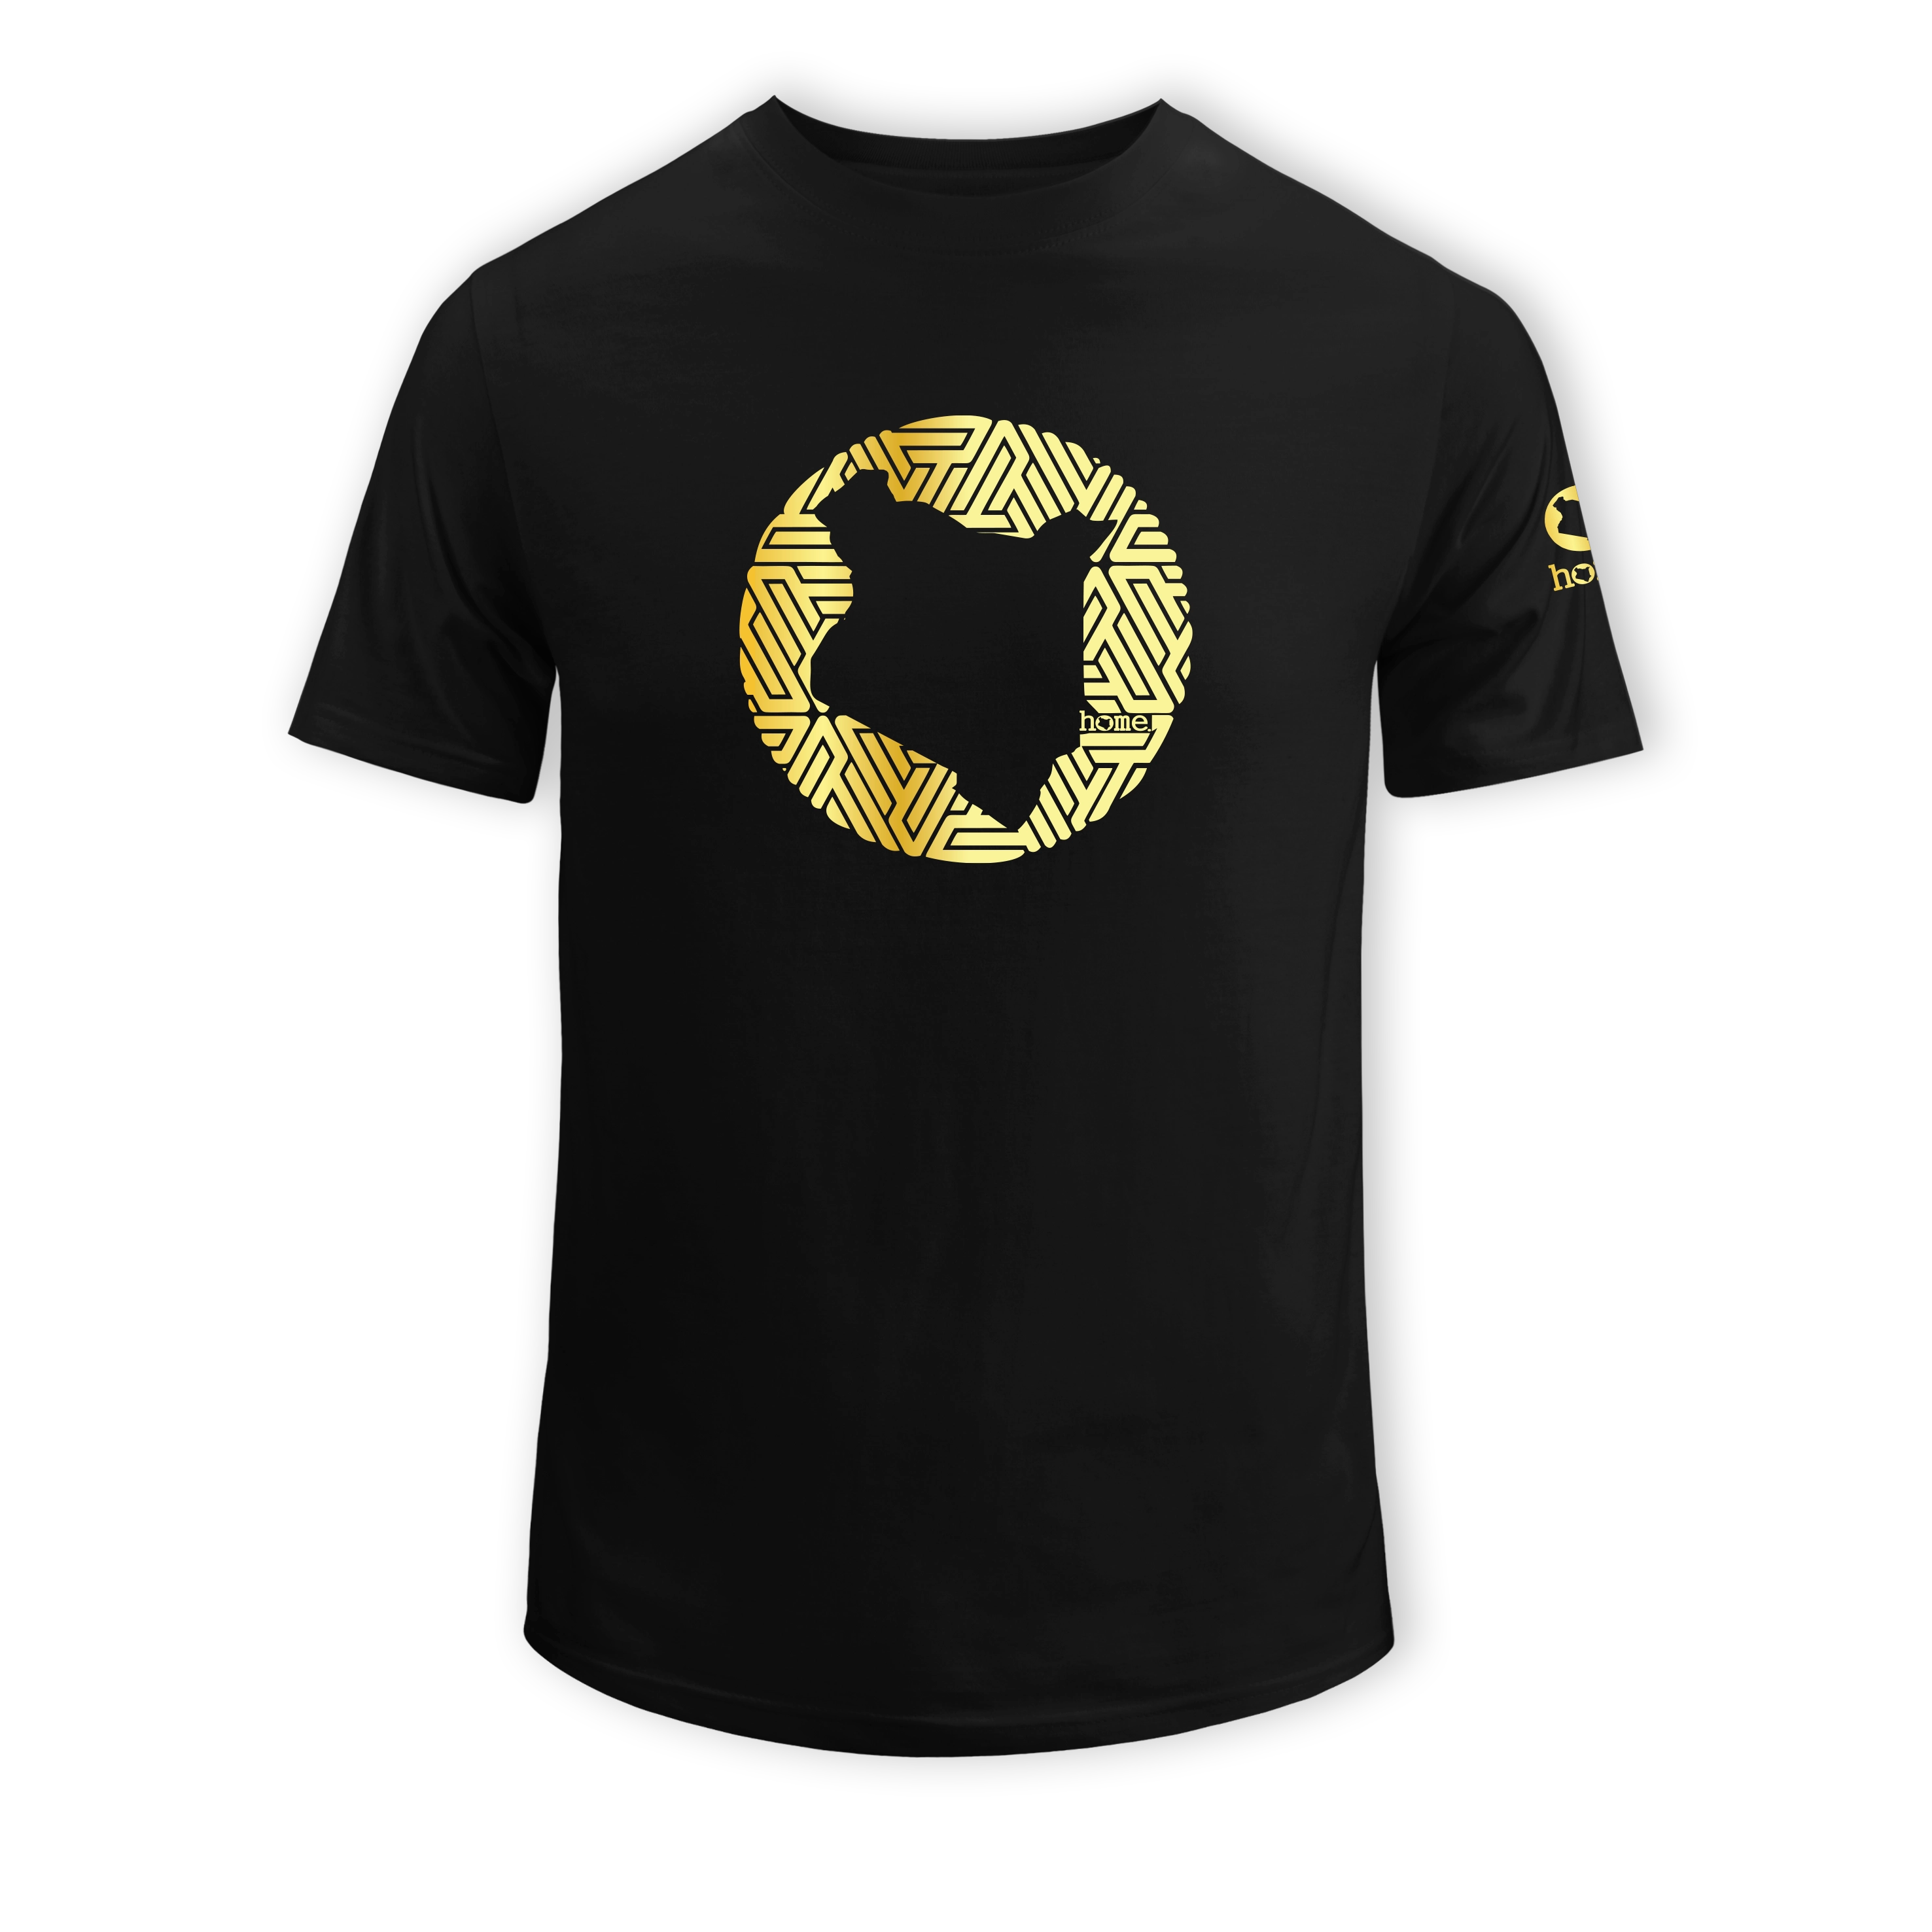 home_254 SHORT-SLEEVED BLACK T-SHIRT WITH A GOLD MAP PRINT – COTTON PLUS FABRIC